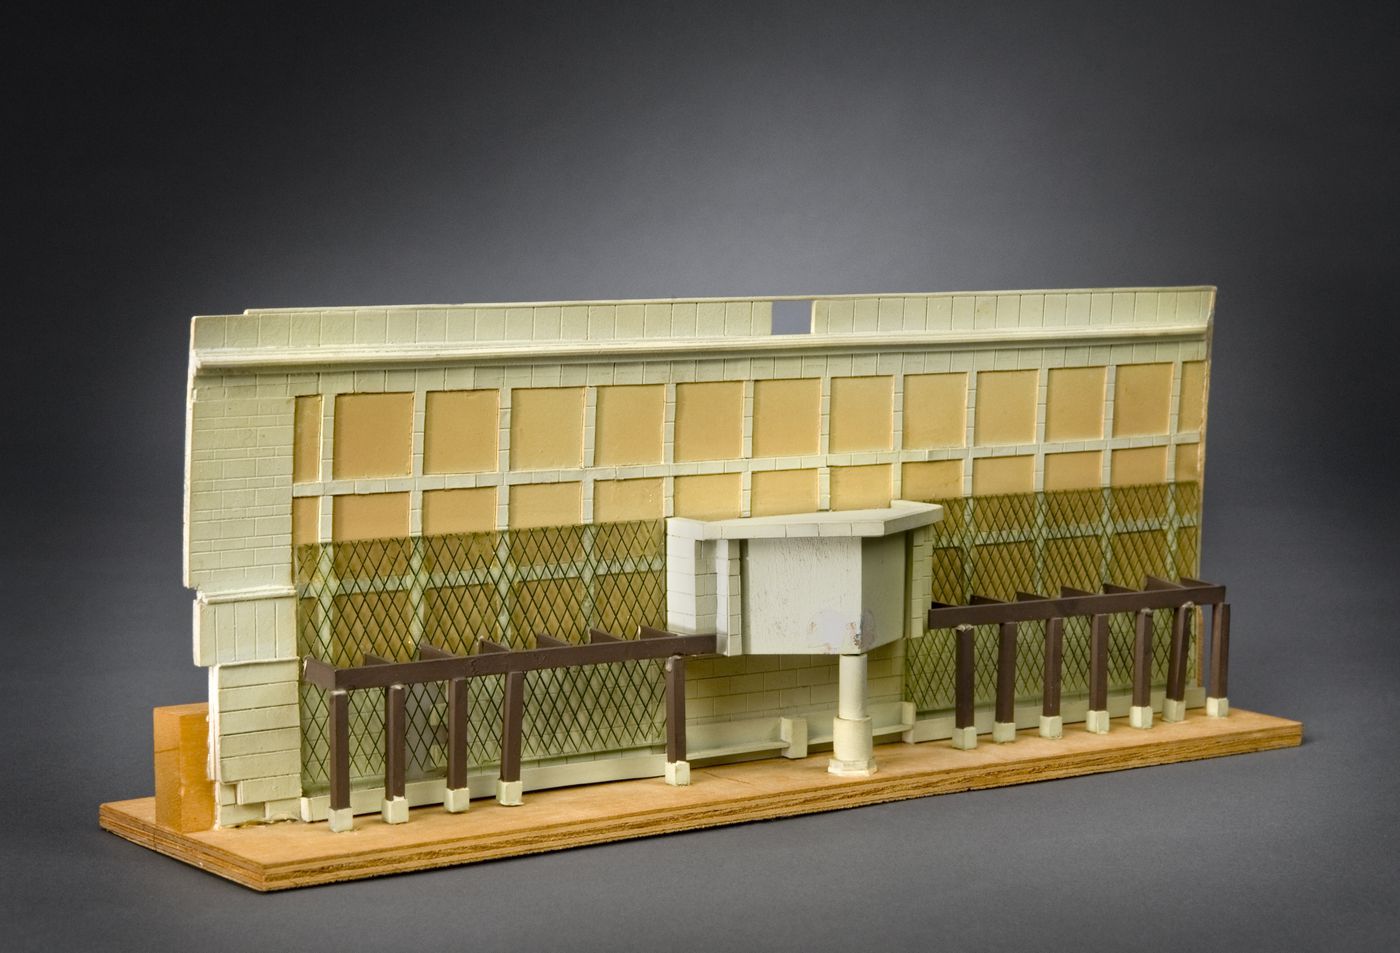 Clore Gallery, London, England: study model for the east elevation